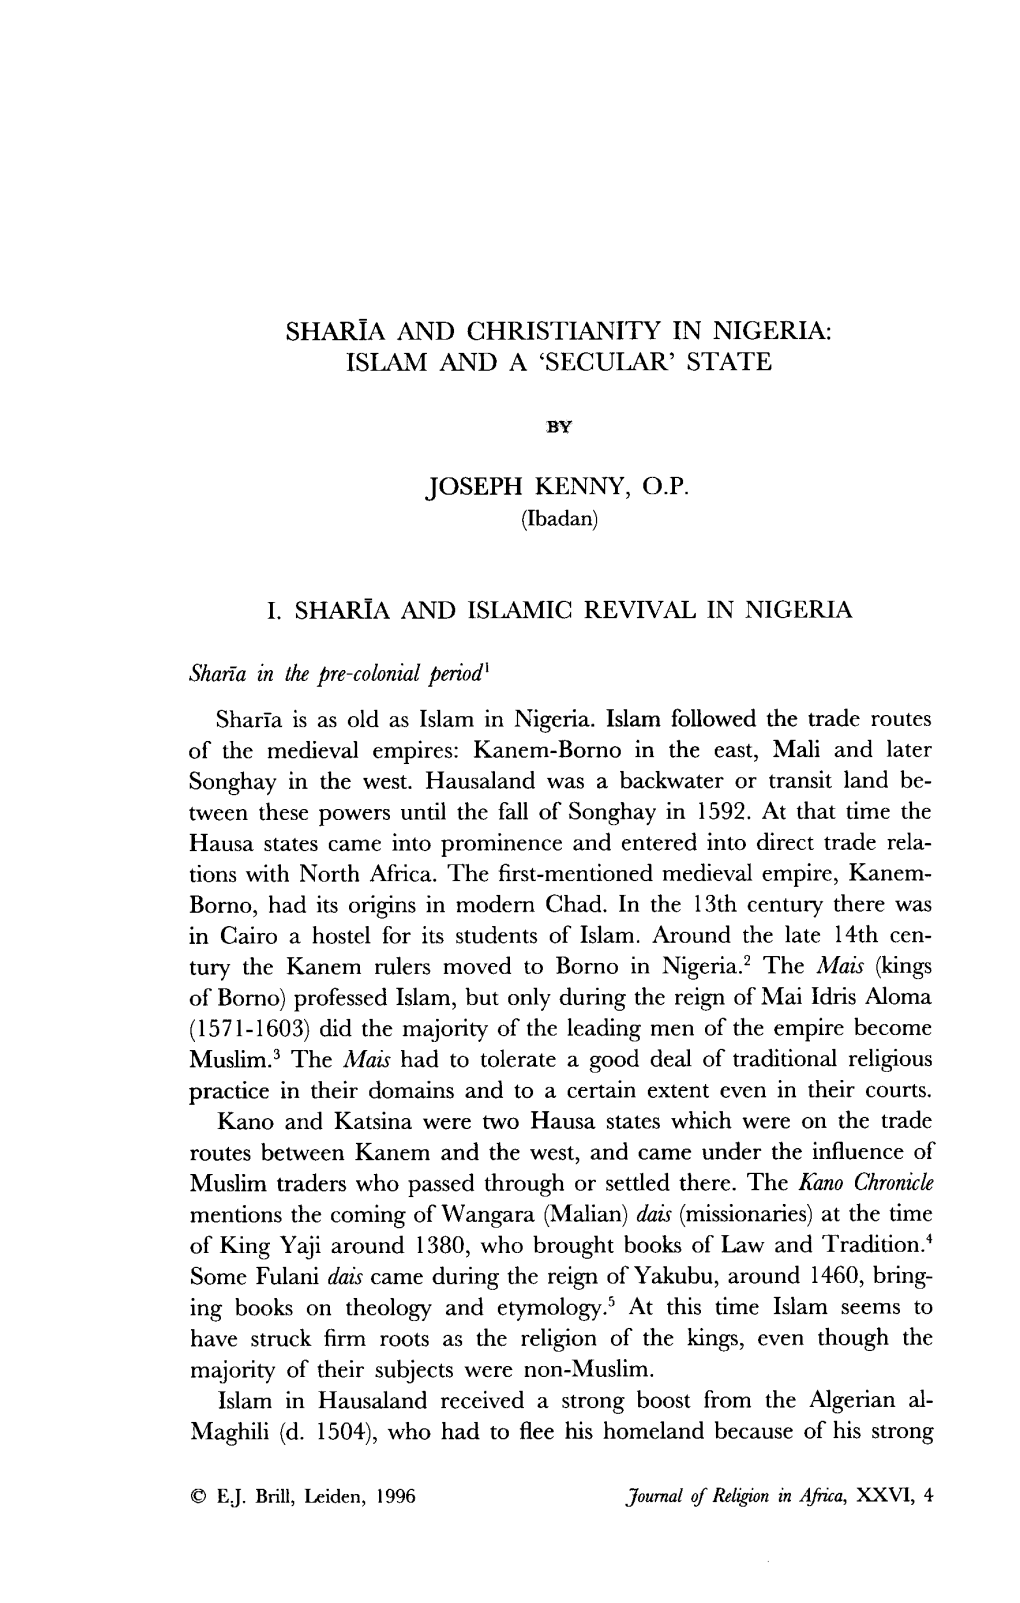 Sharia and Christianity in Nigeria: Islam and a 'Secular' State